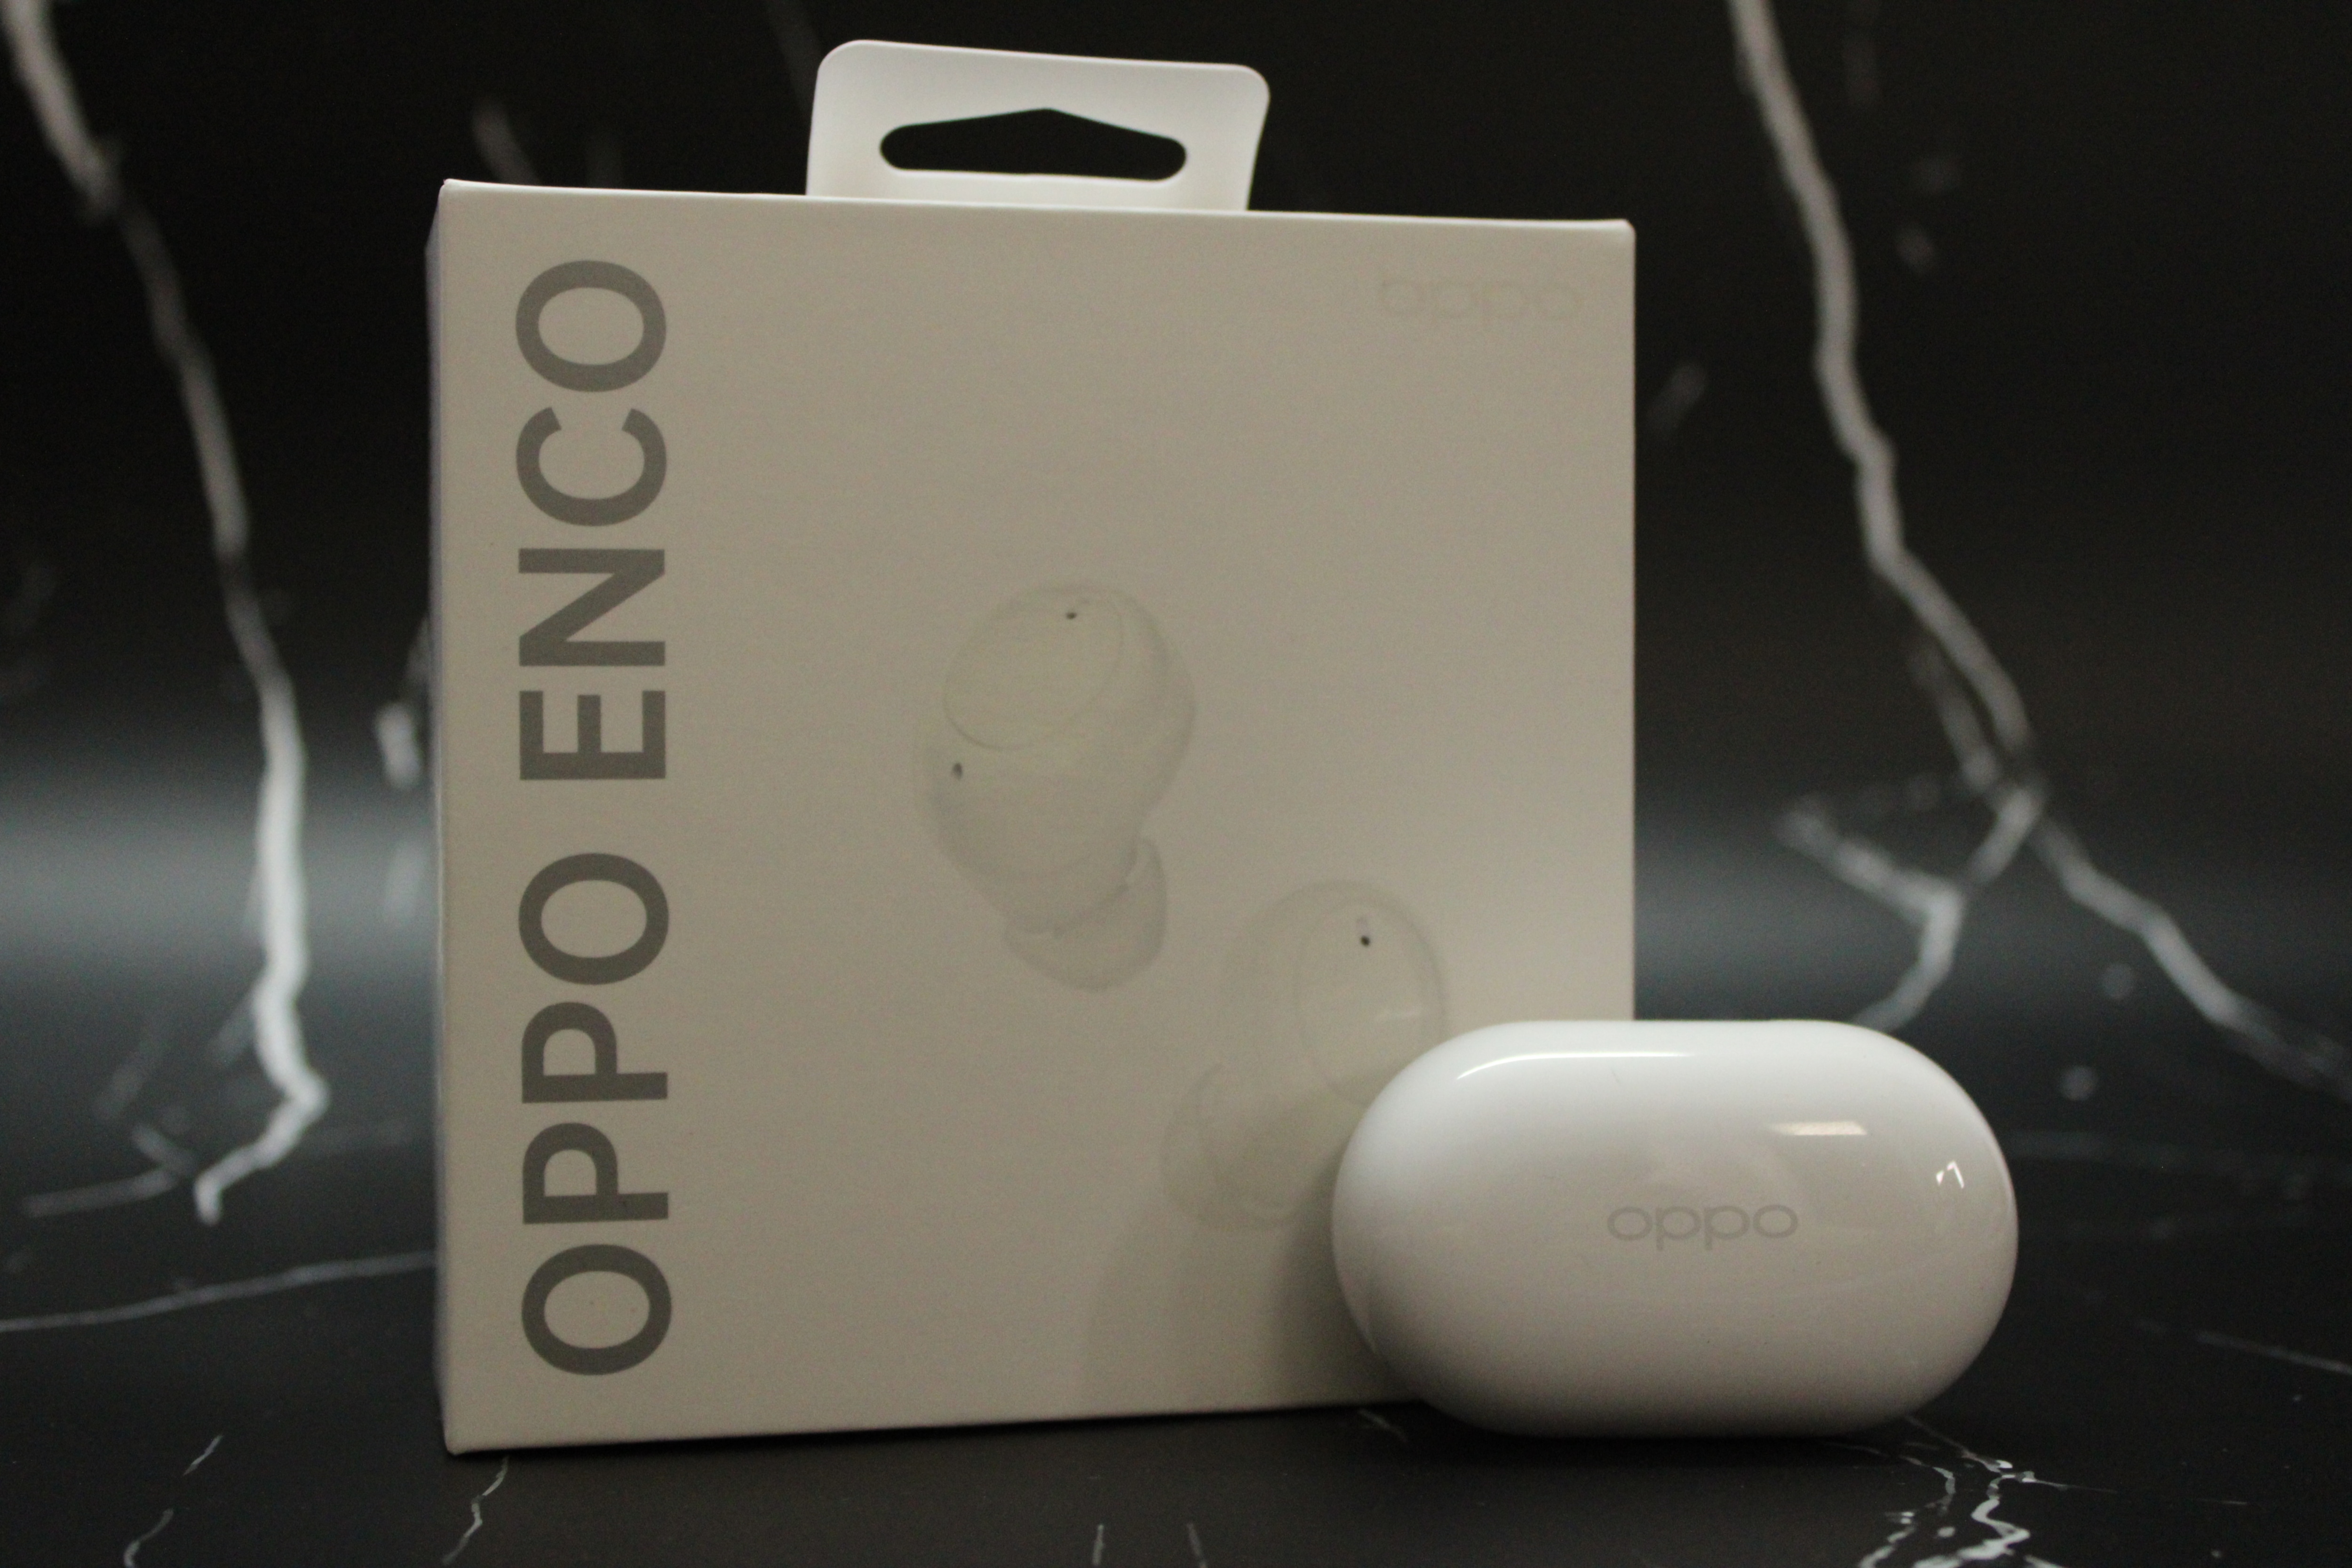 Oppo Enco Buds review: Comfortable Fit, Inexpensive Hit